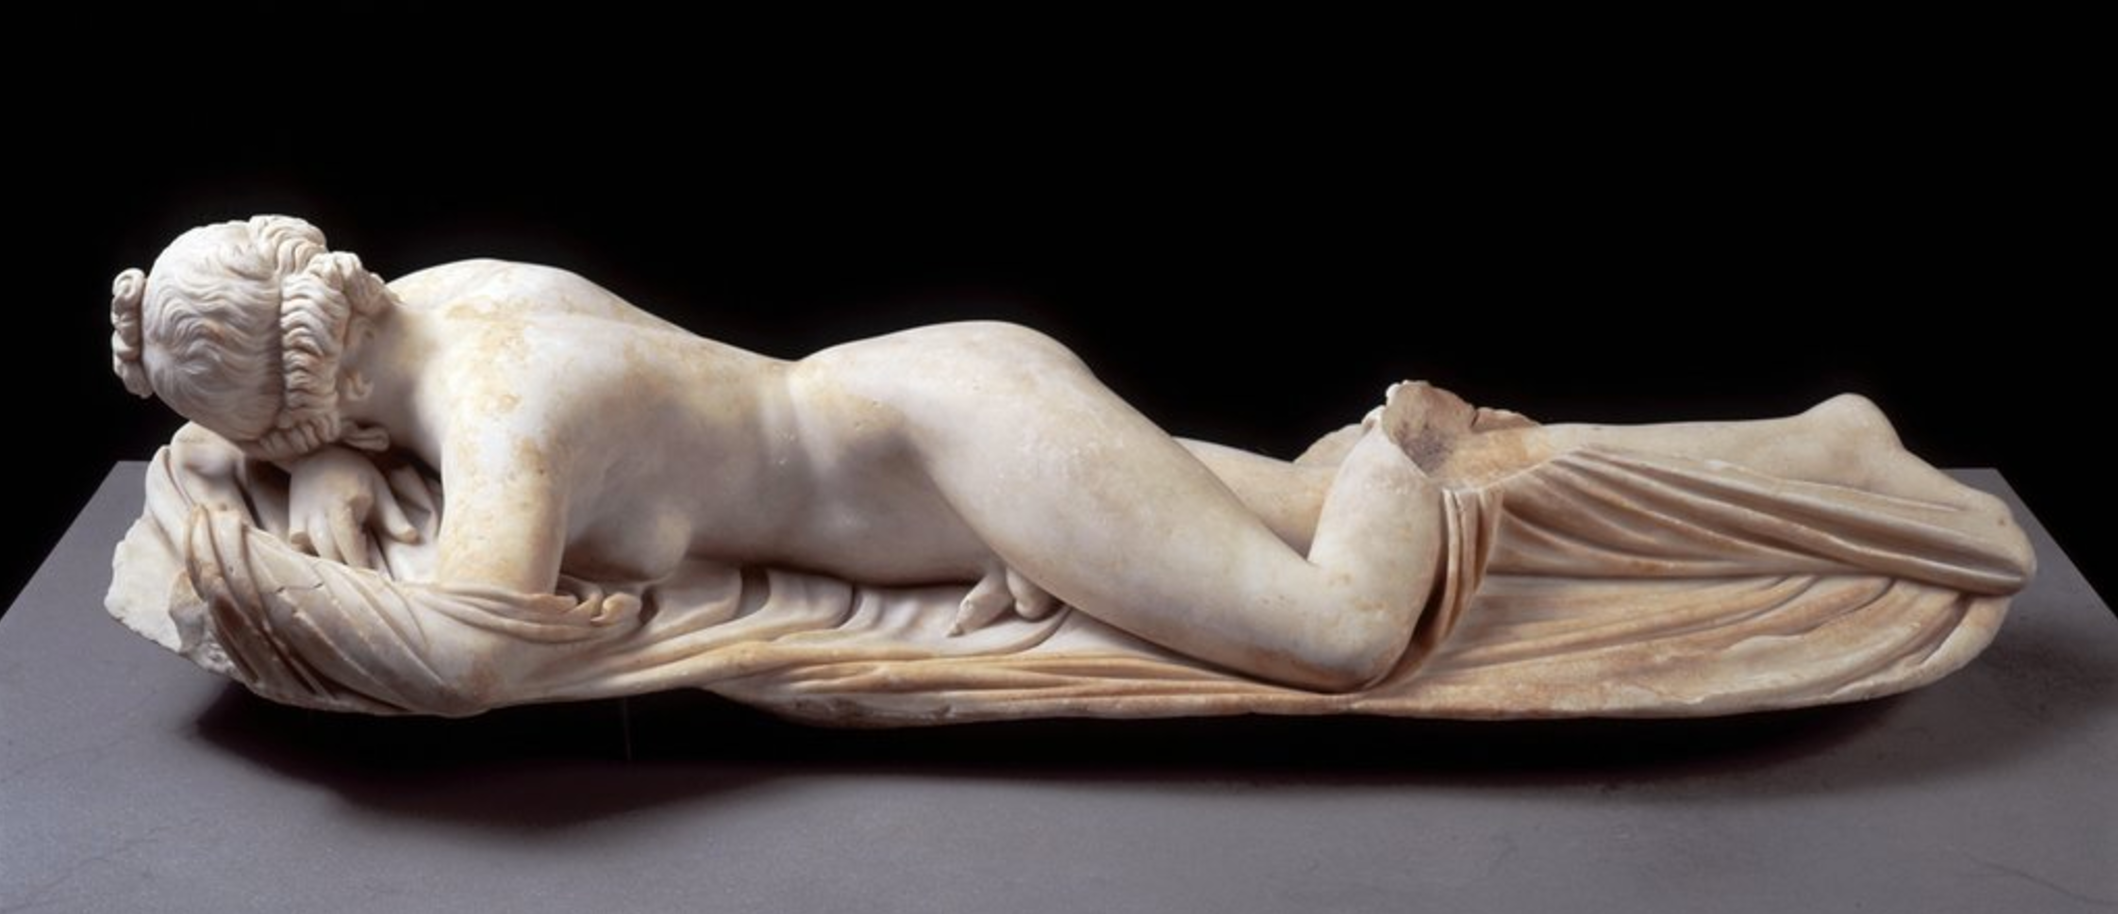 The Sleeping Hermaphrodite: A Modern Agenda with Ancient Roots? 